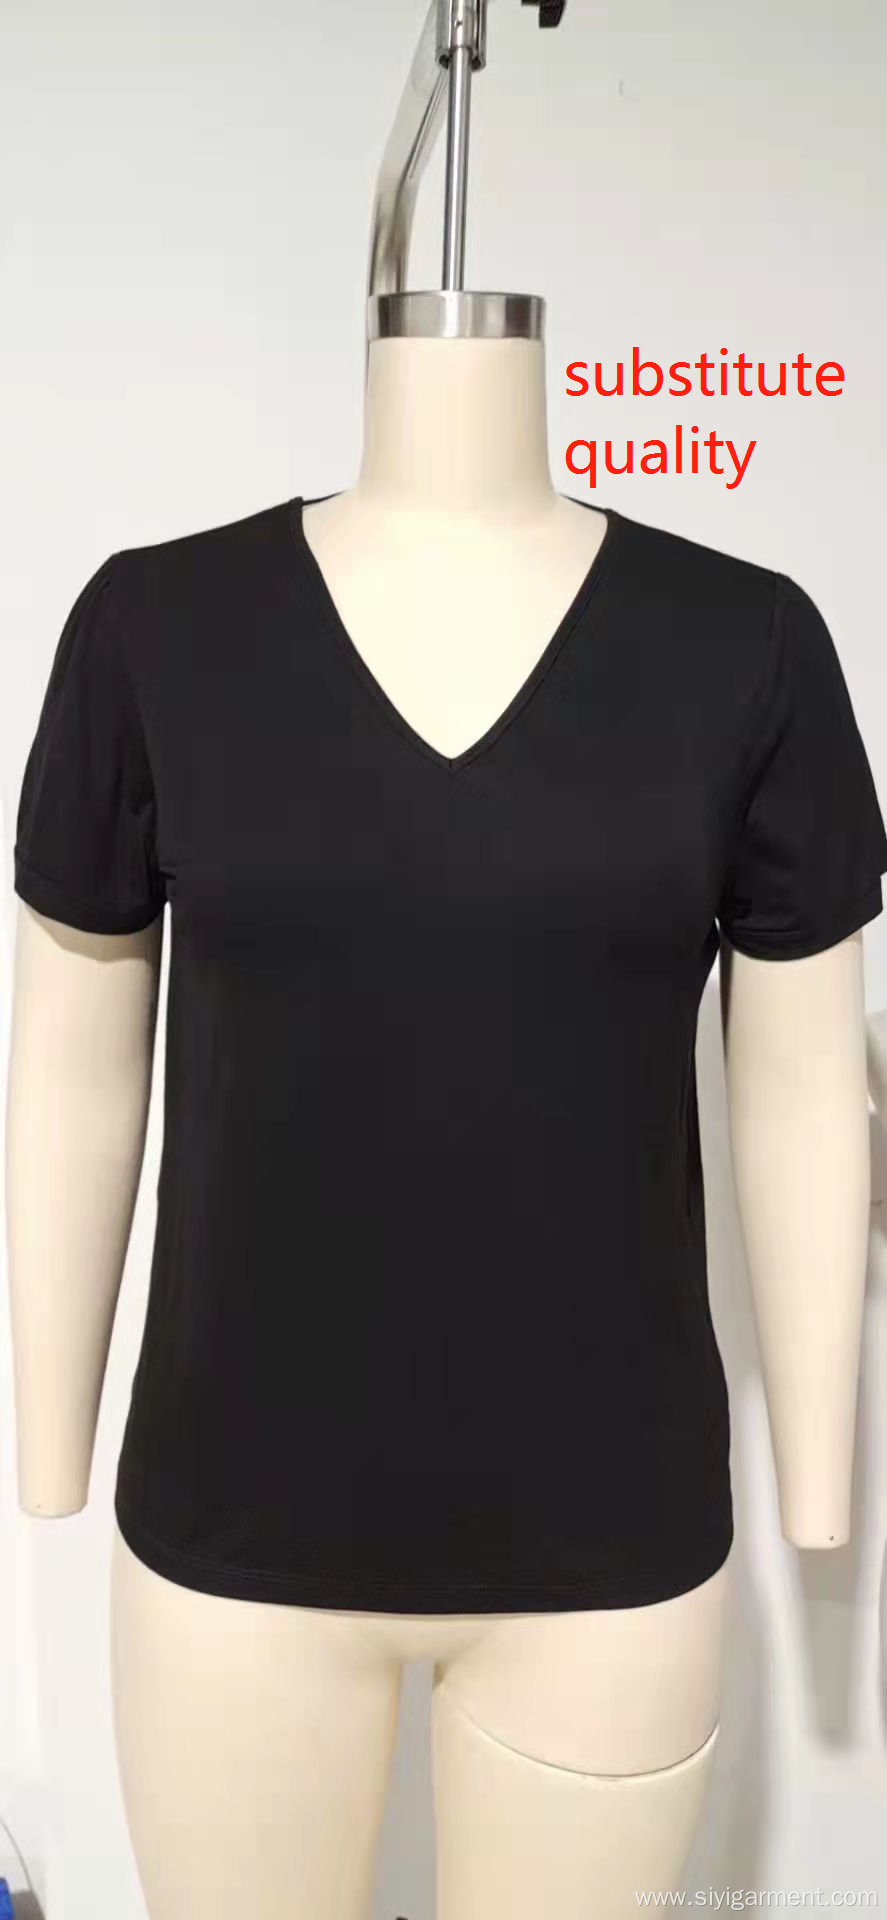 V-NECK WOMEN T-SHIRT WITH BUBBLE SLEEVE